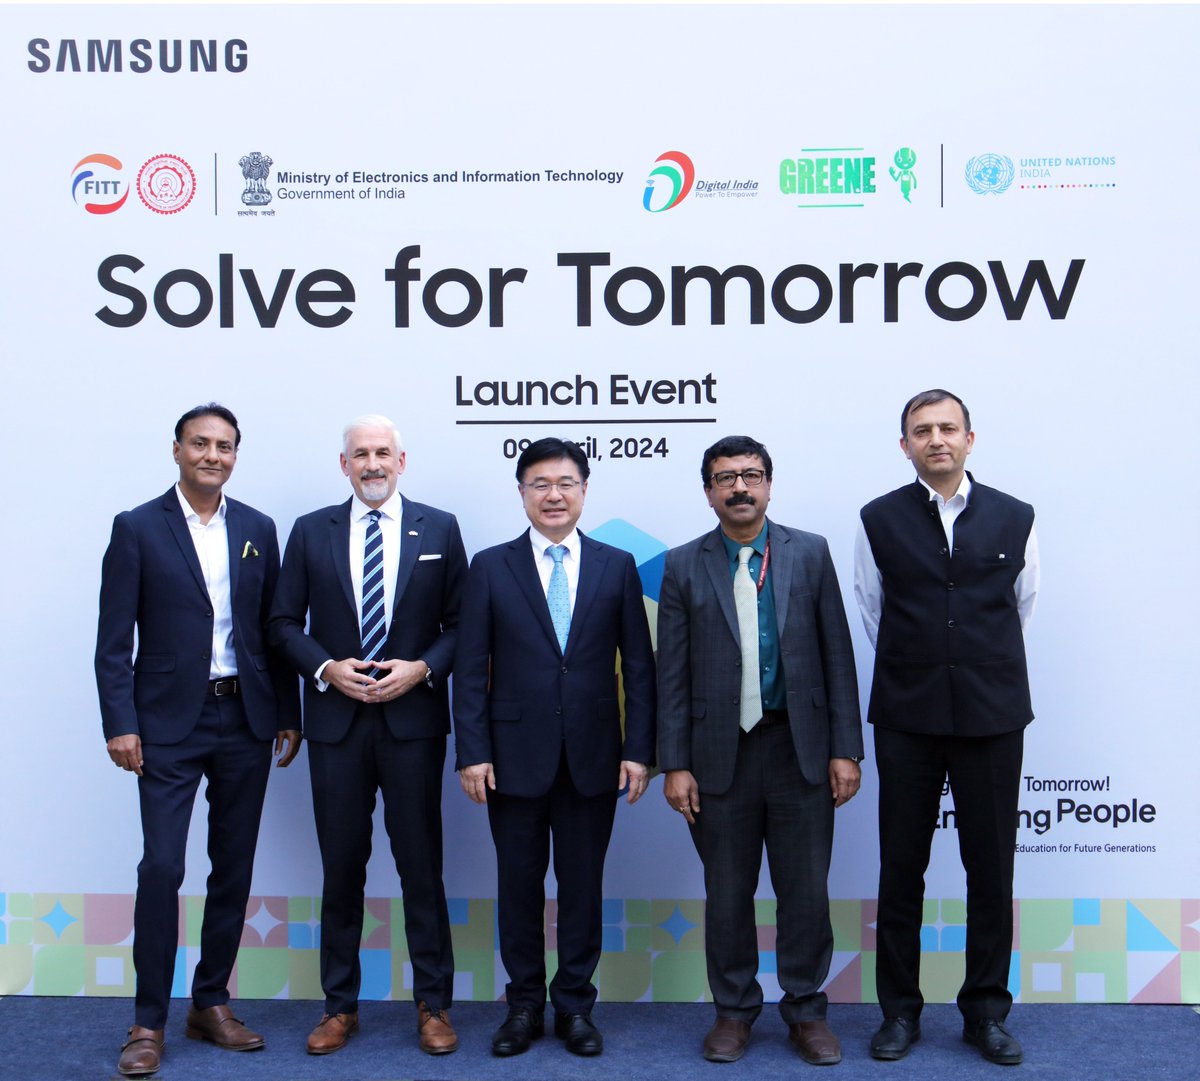 Samsung in collaboration with @GoI_MeitY, @UNinIndia and @FITT_IIT Delhi, has announced the 3rd edition of its flagship CSR initiative– Solve for Tomorrow, to usher a culture of innovative thinking and problem solving amongst the country’s youth.

#DigitalIndia #SolveForTomorrow